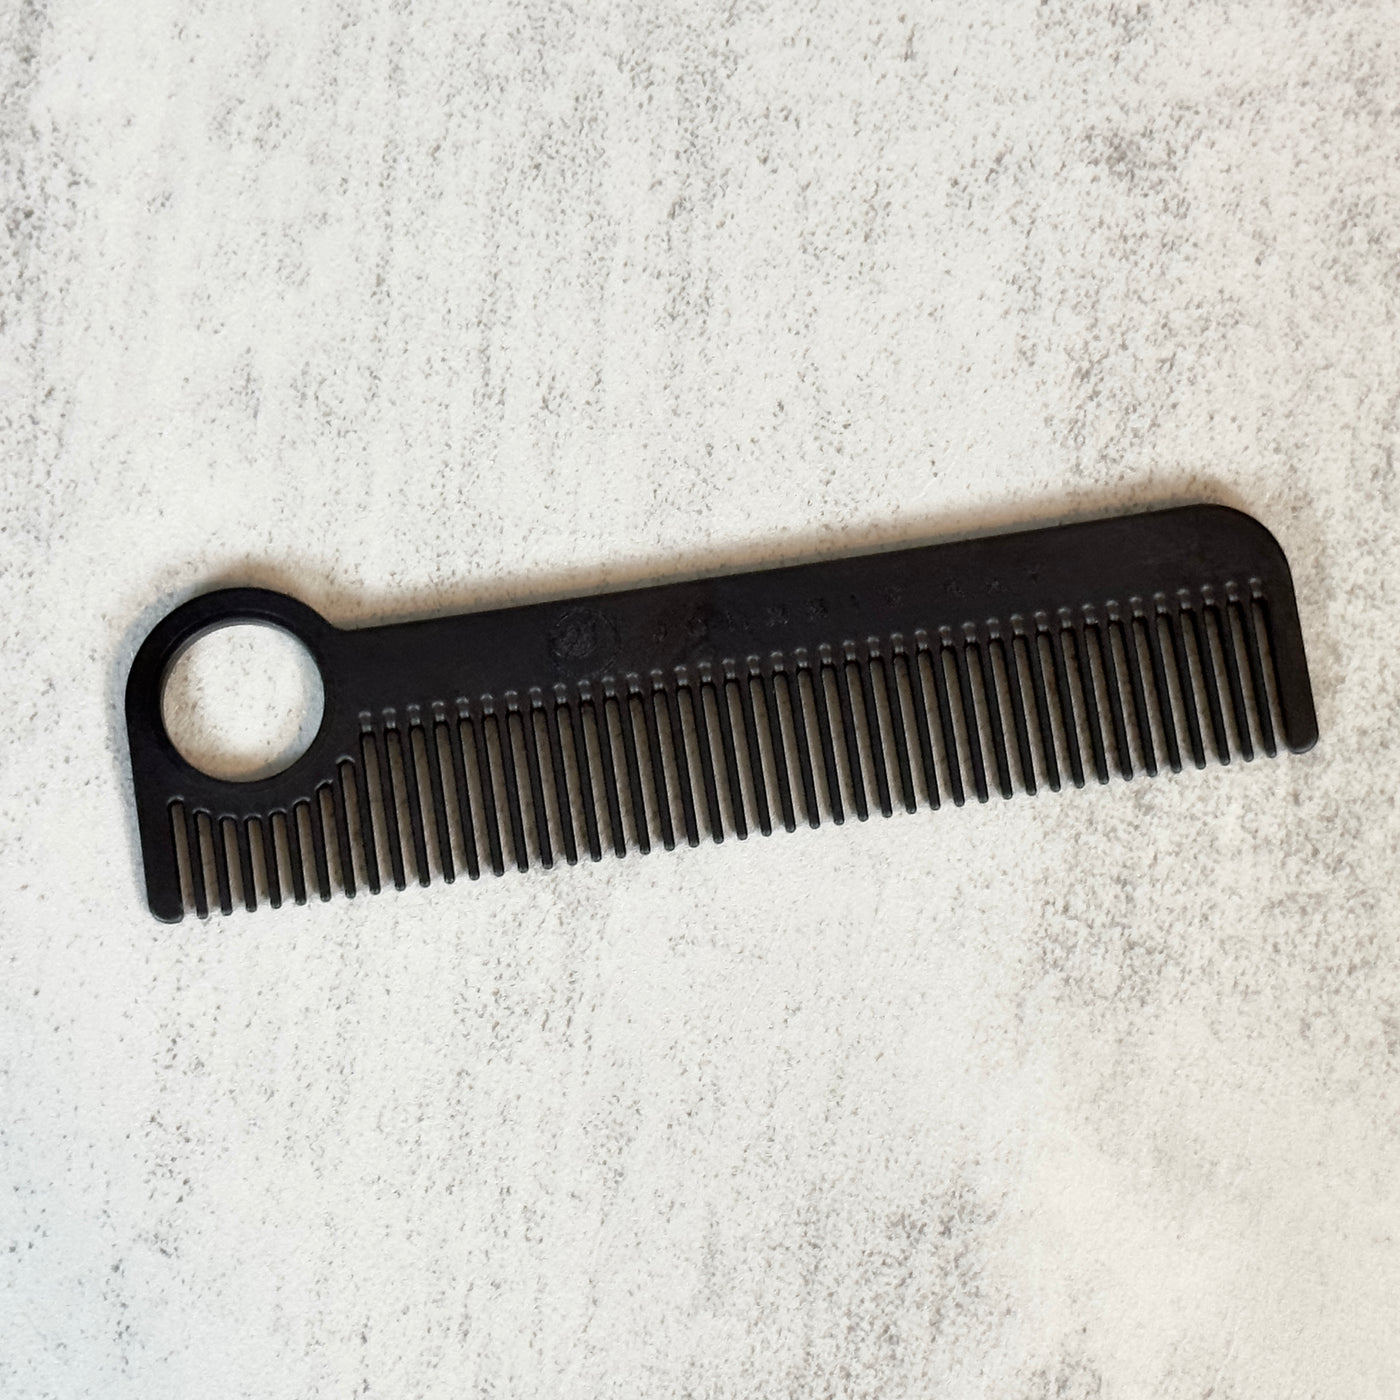 Black Chicago Comb Model 1 laid at an angle against concrete background.